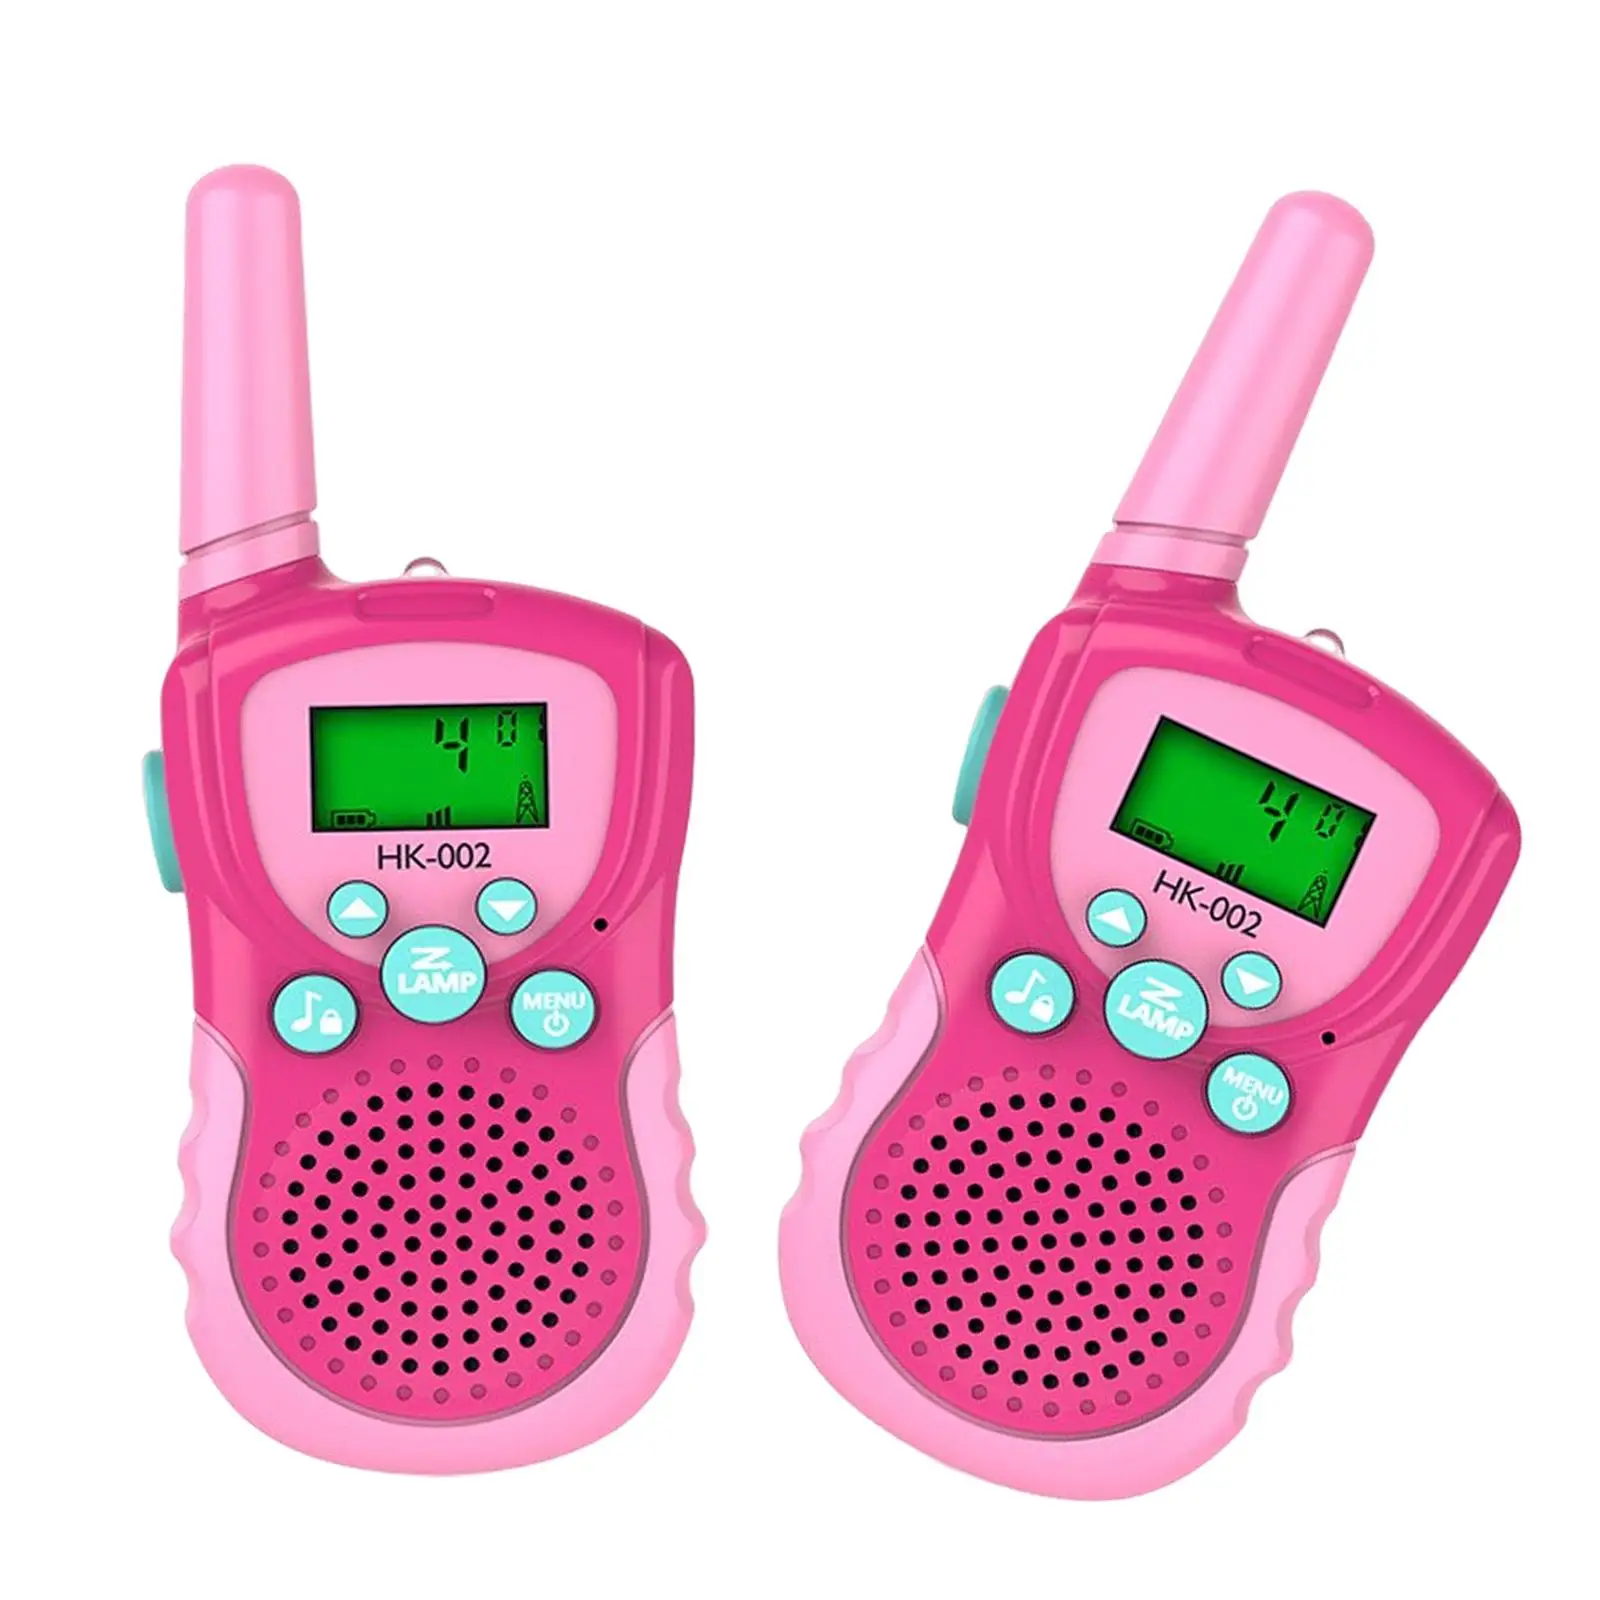 2Pcs Walkie Talkies for Kids with Belt Clip 22 Channels Present 2 Way Radio Toys for Games 3-14 Years Old Camping Hiking Indoor